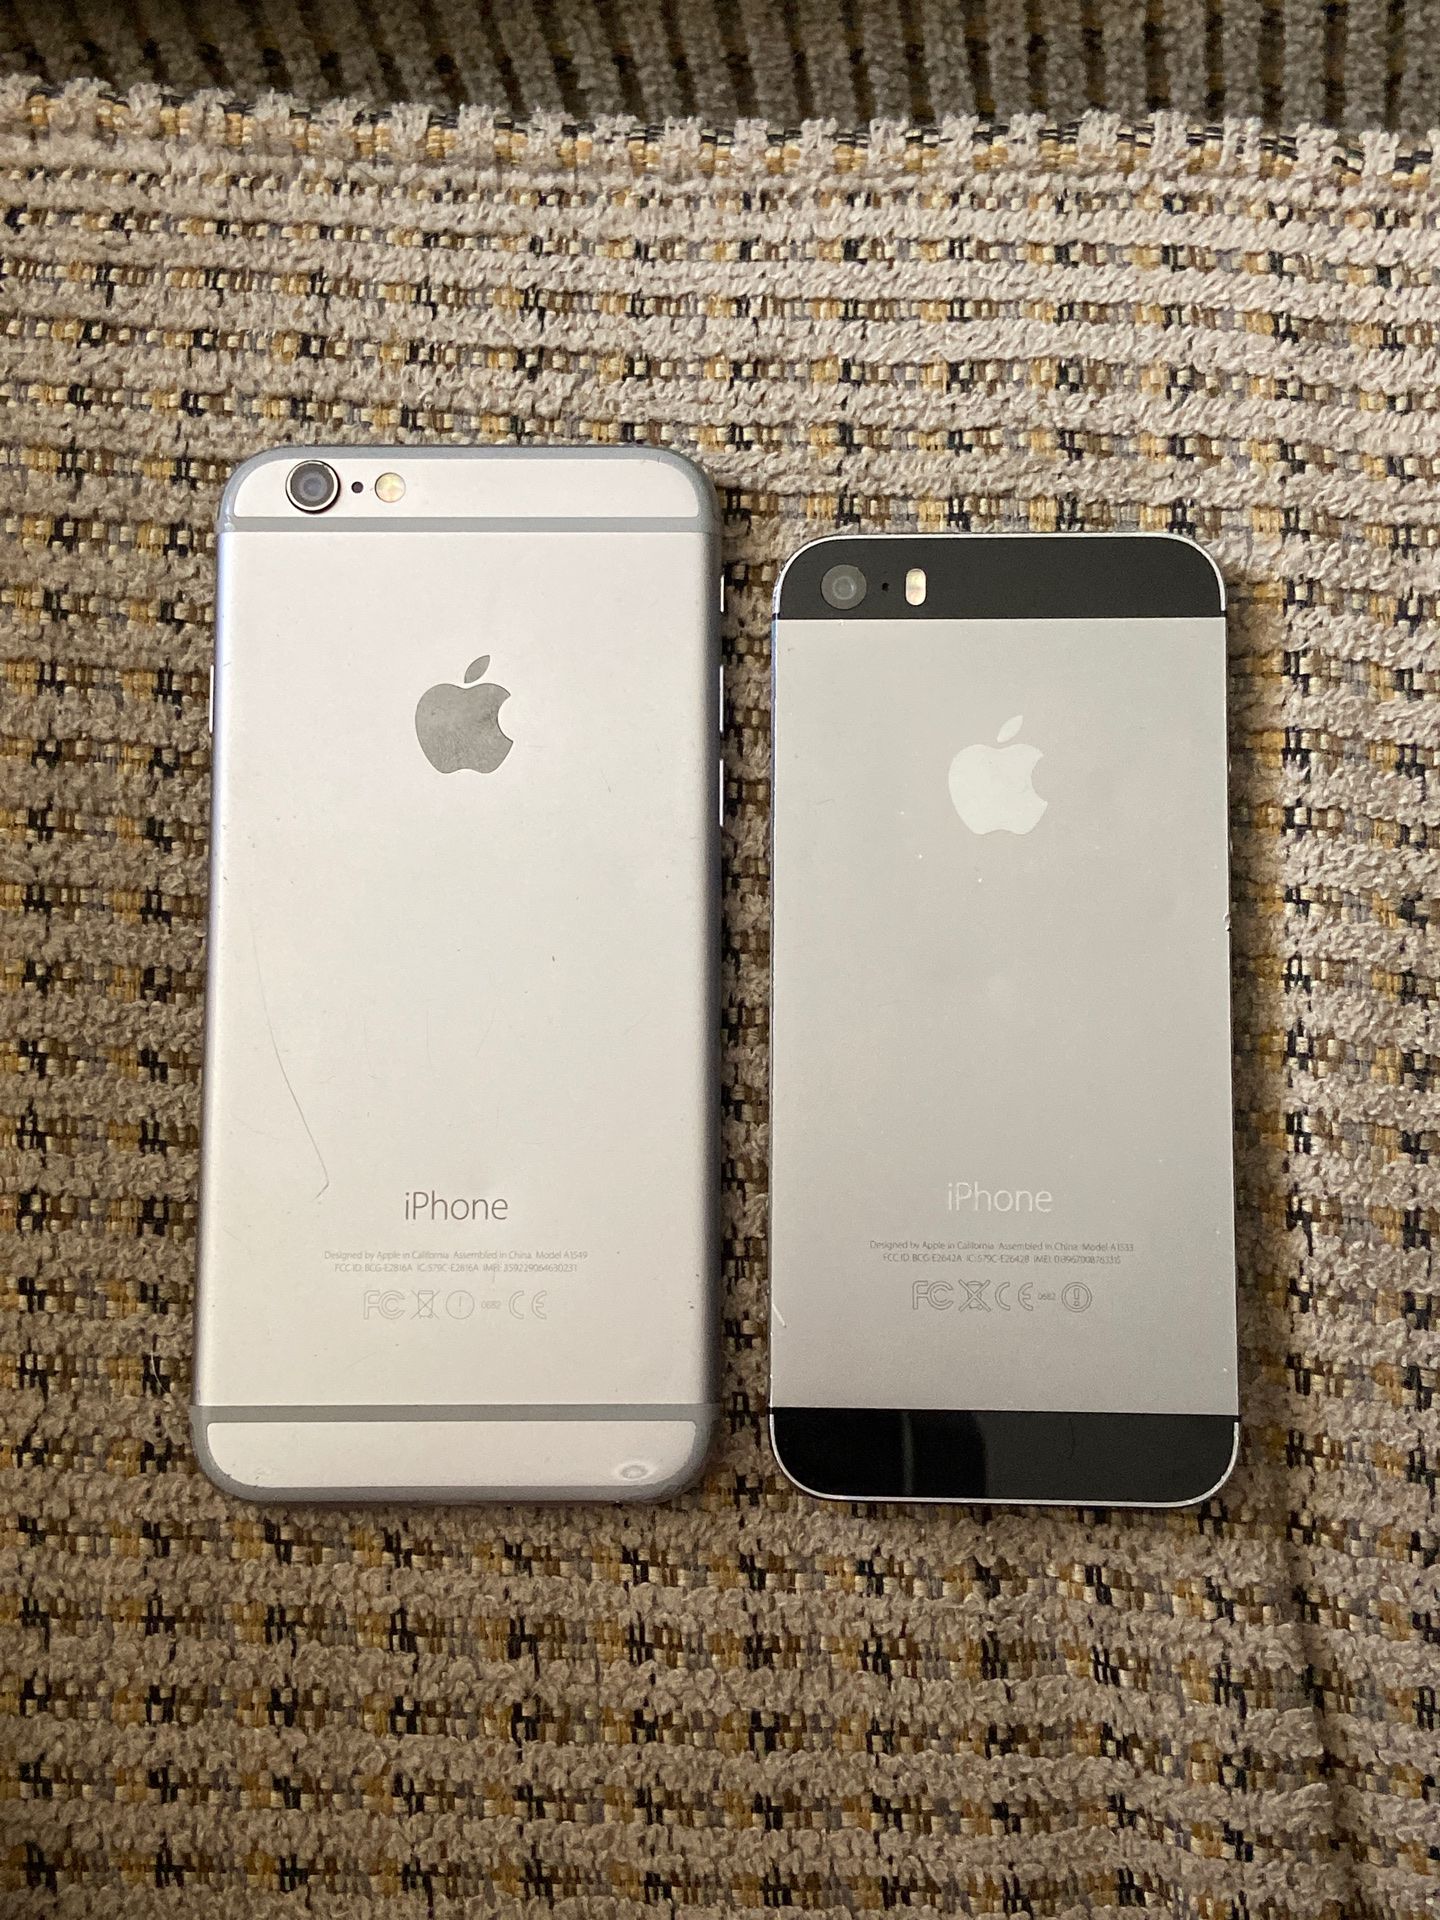 iPhone 6 and IPhone 5